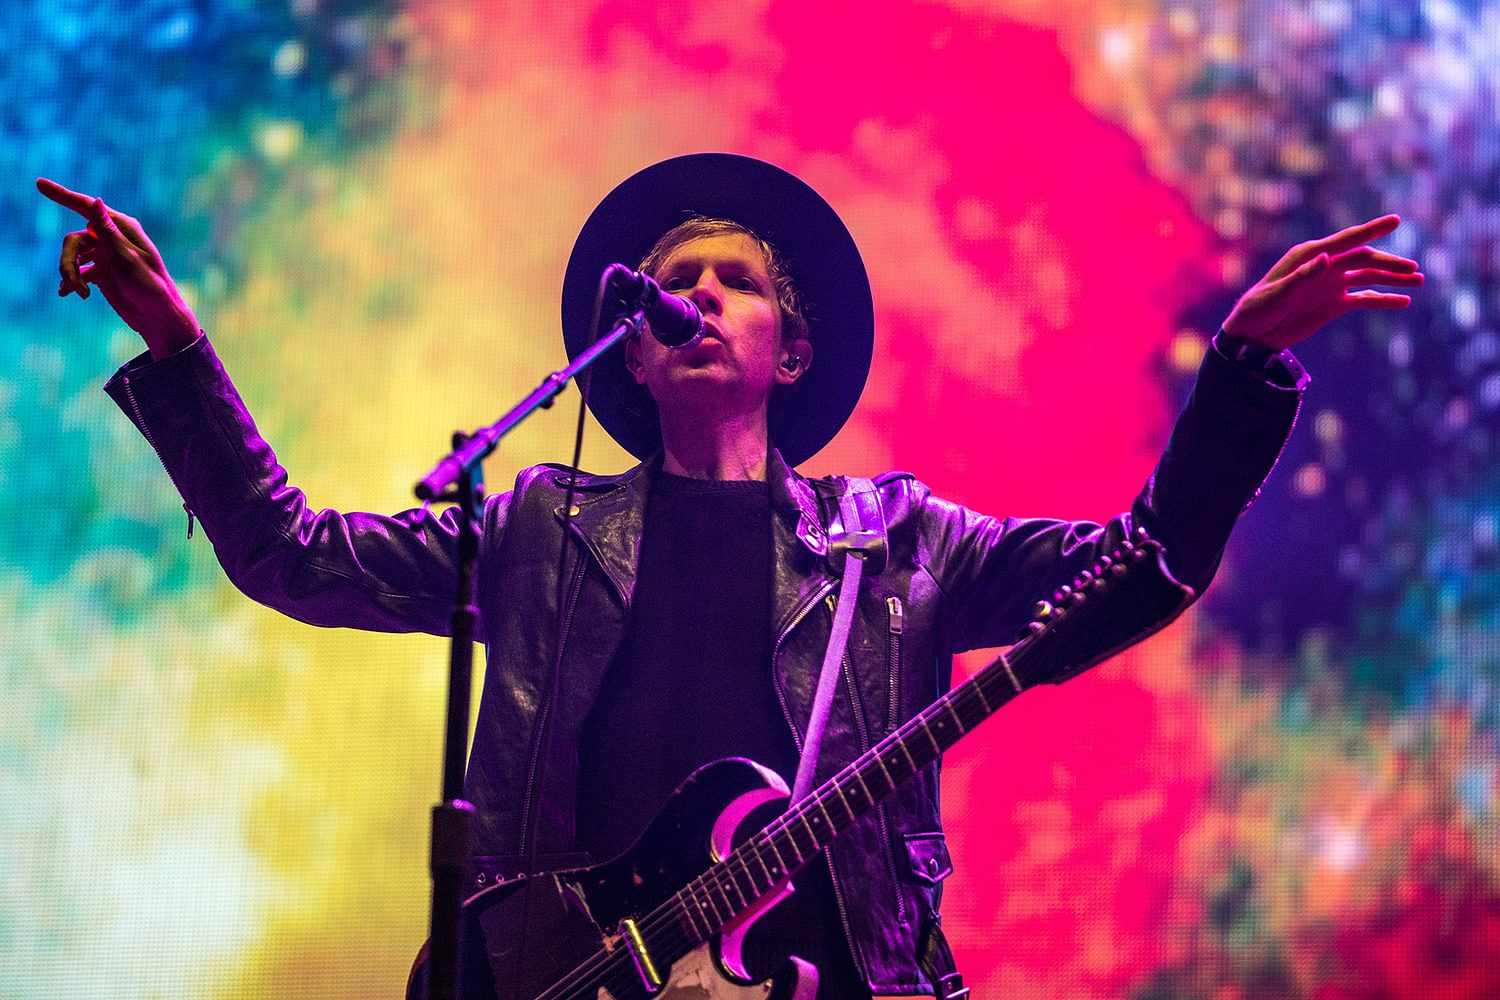 Watch Beck and members of Coldplay and Red Hot Chili Peppers form "new boy band"